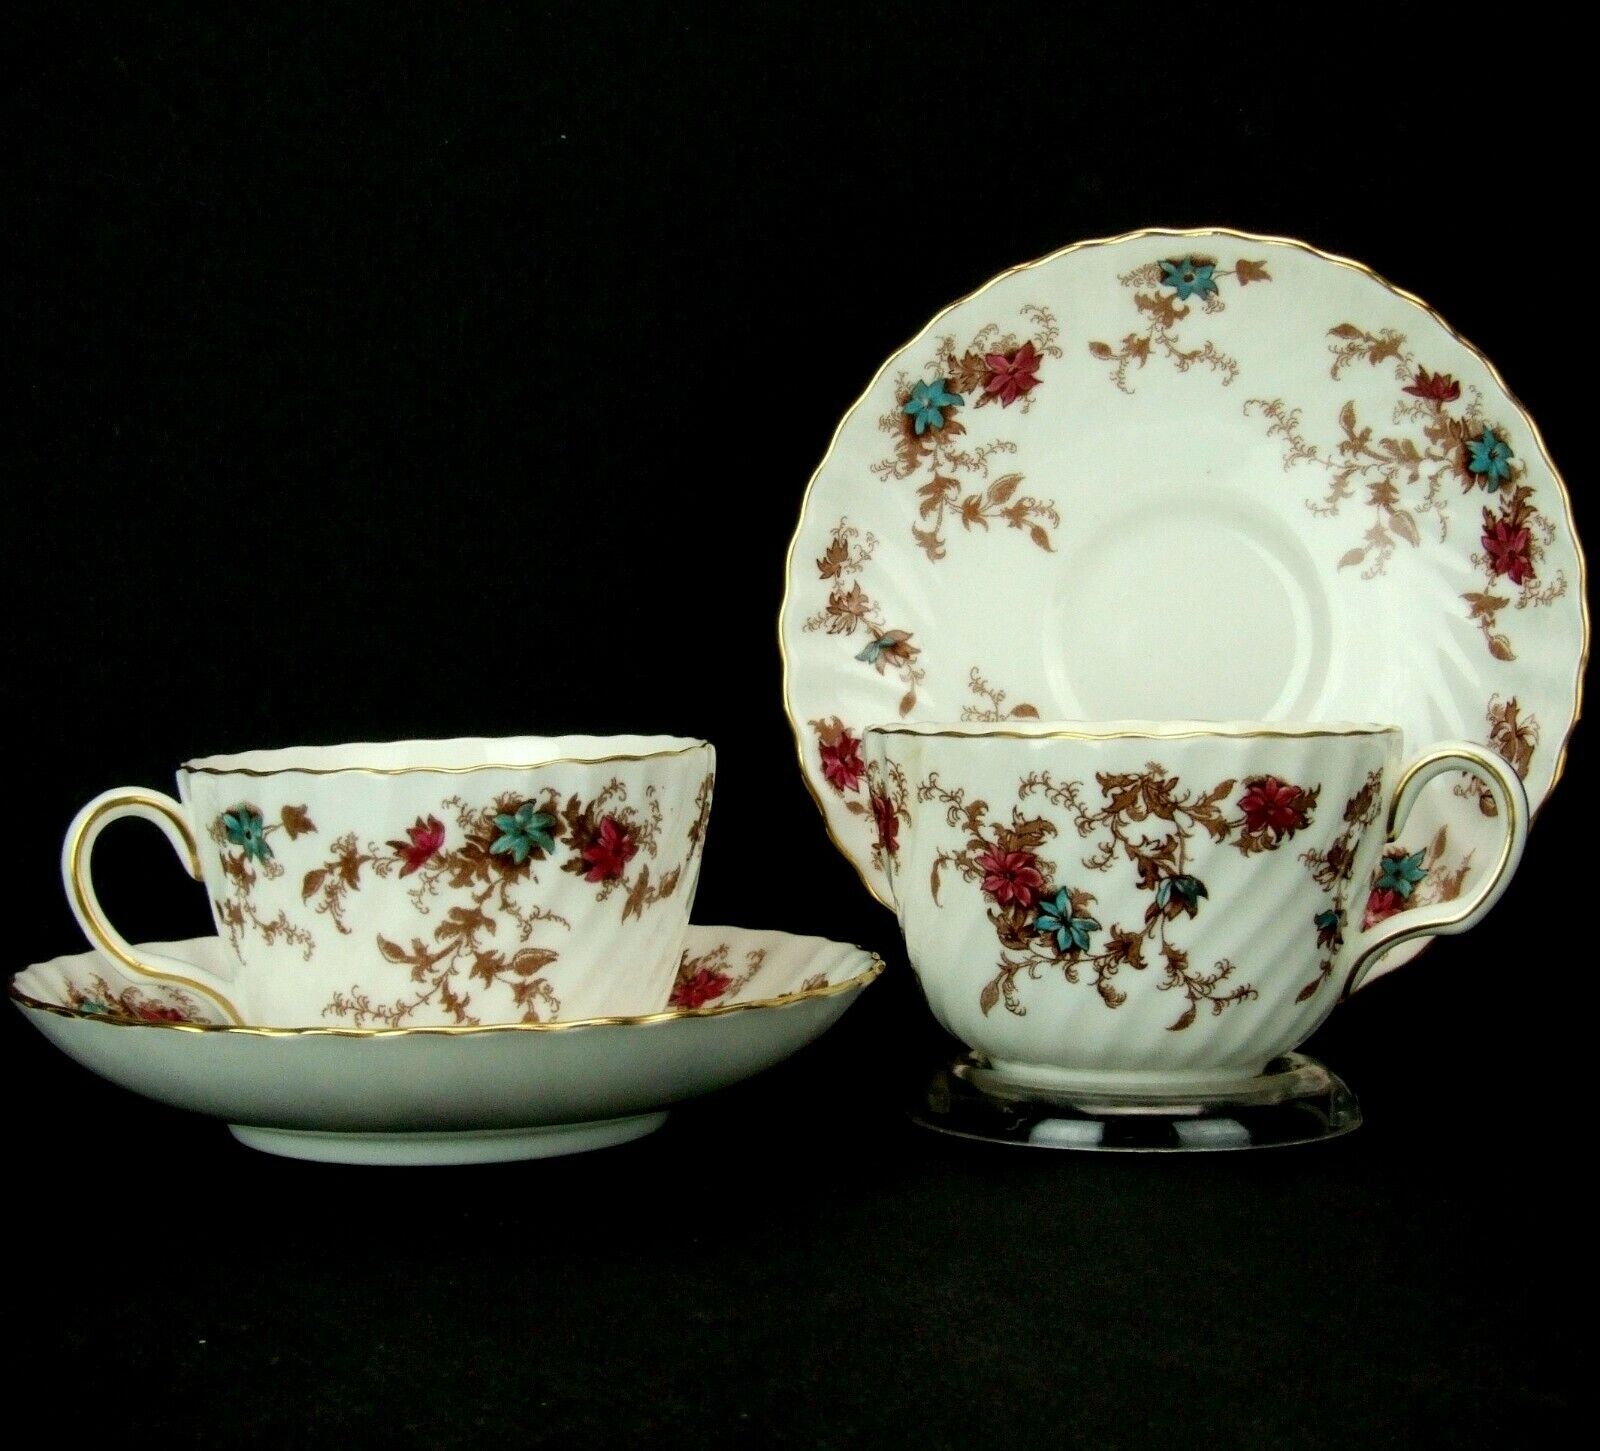 Minton Ancestral Bone China Cup & Saucer Set of 2 S376 